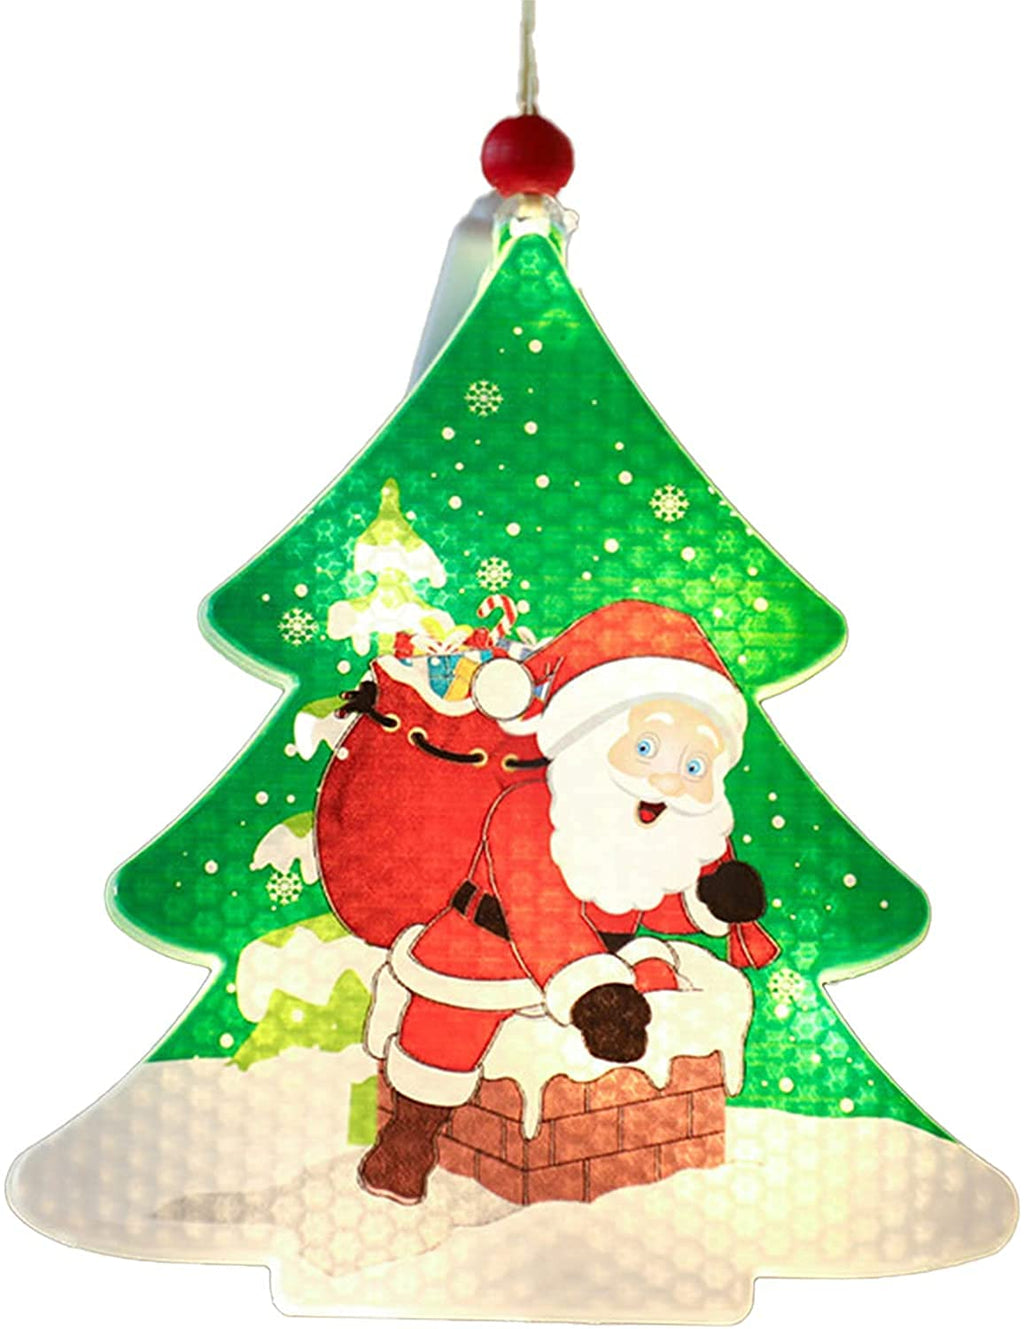 MXJFYY Christmas Decoration, LED Hanging Lights Classic Christmas Elements Lights Painted Ornaments for Christmas Home Showcases Shops Holidays Decoration for Kids Gift (Tree) Tree